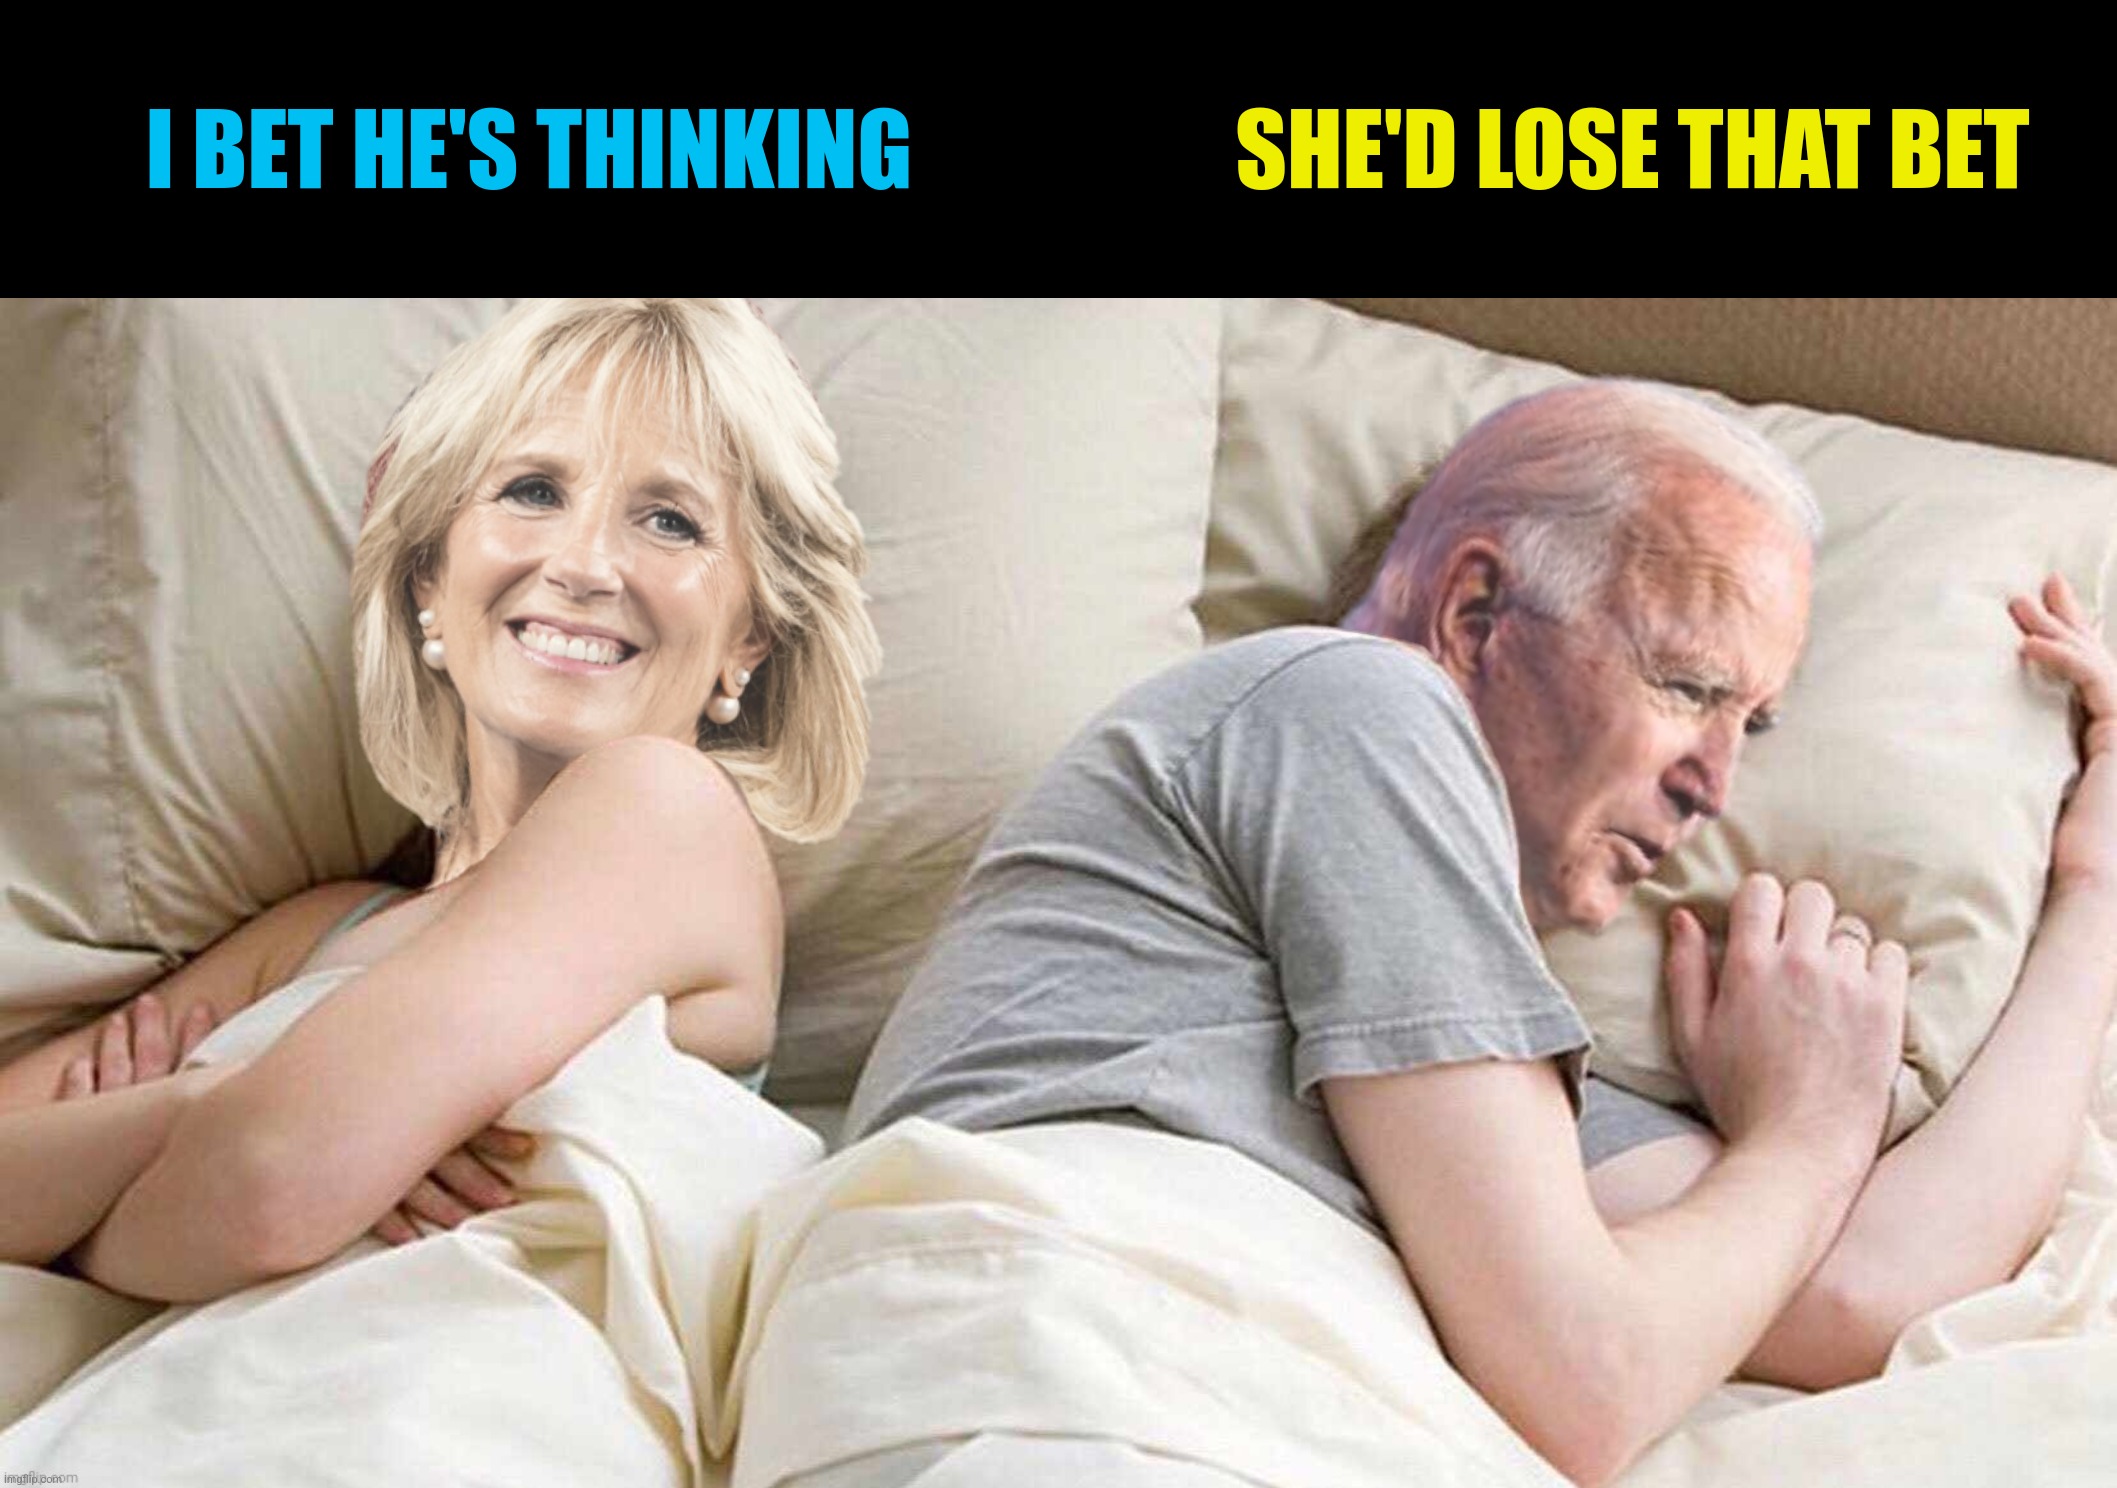 I BET HE'S THINKING SHE'D LOSE THAT BET | made w/ Imgflip meme maker